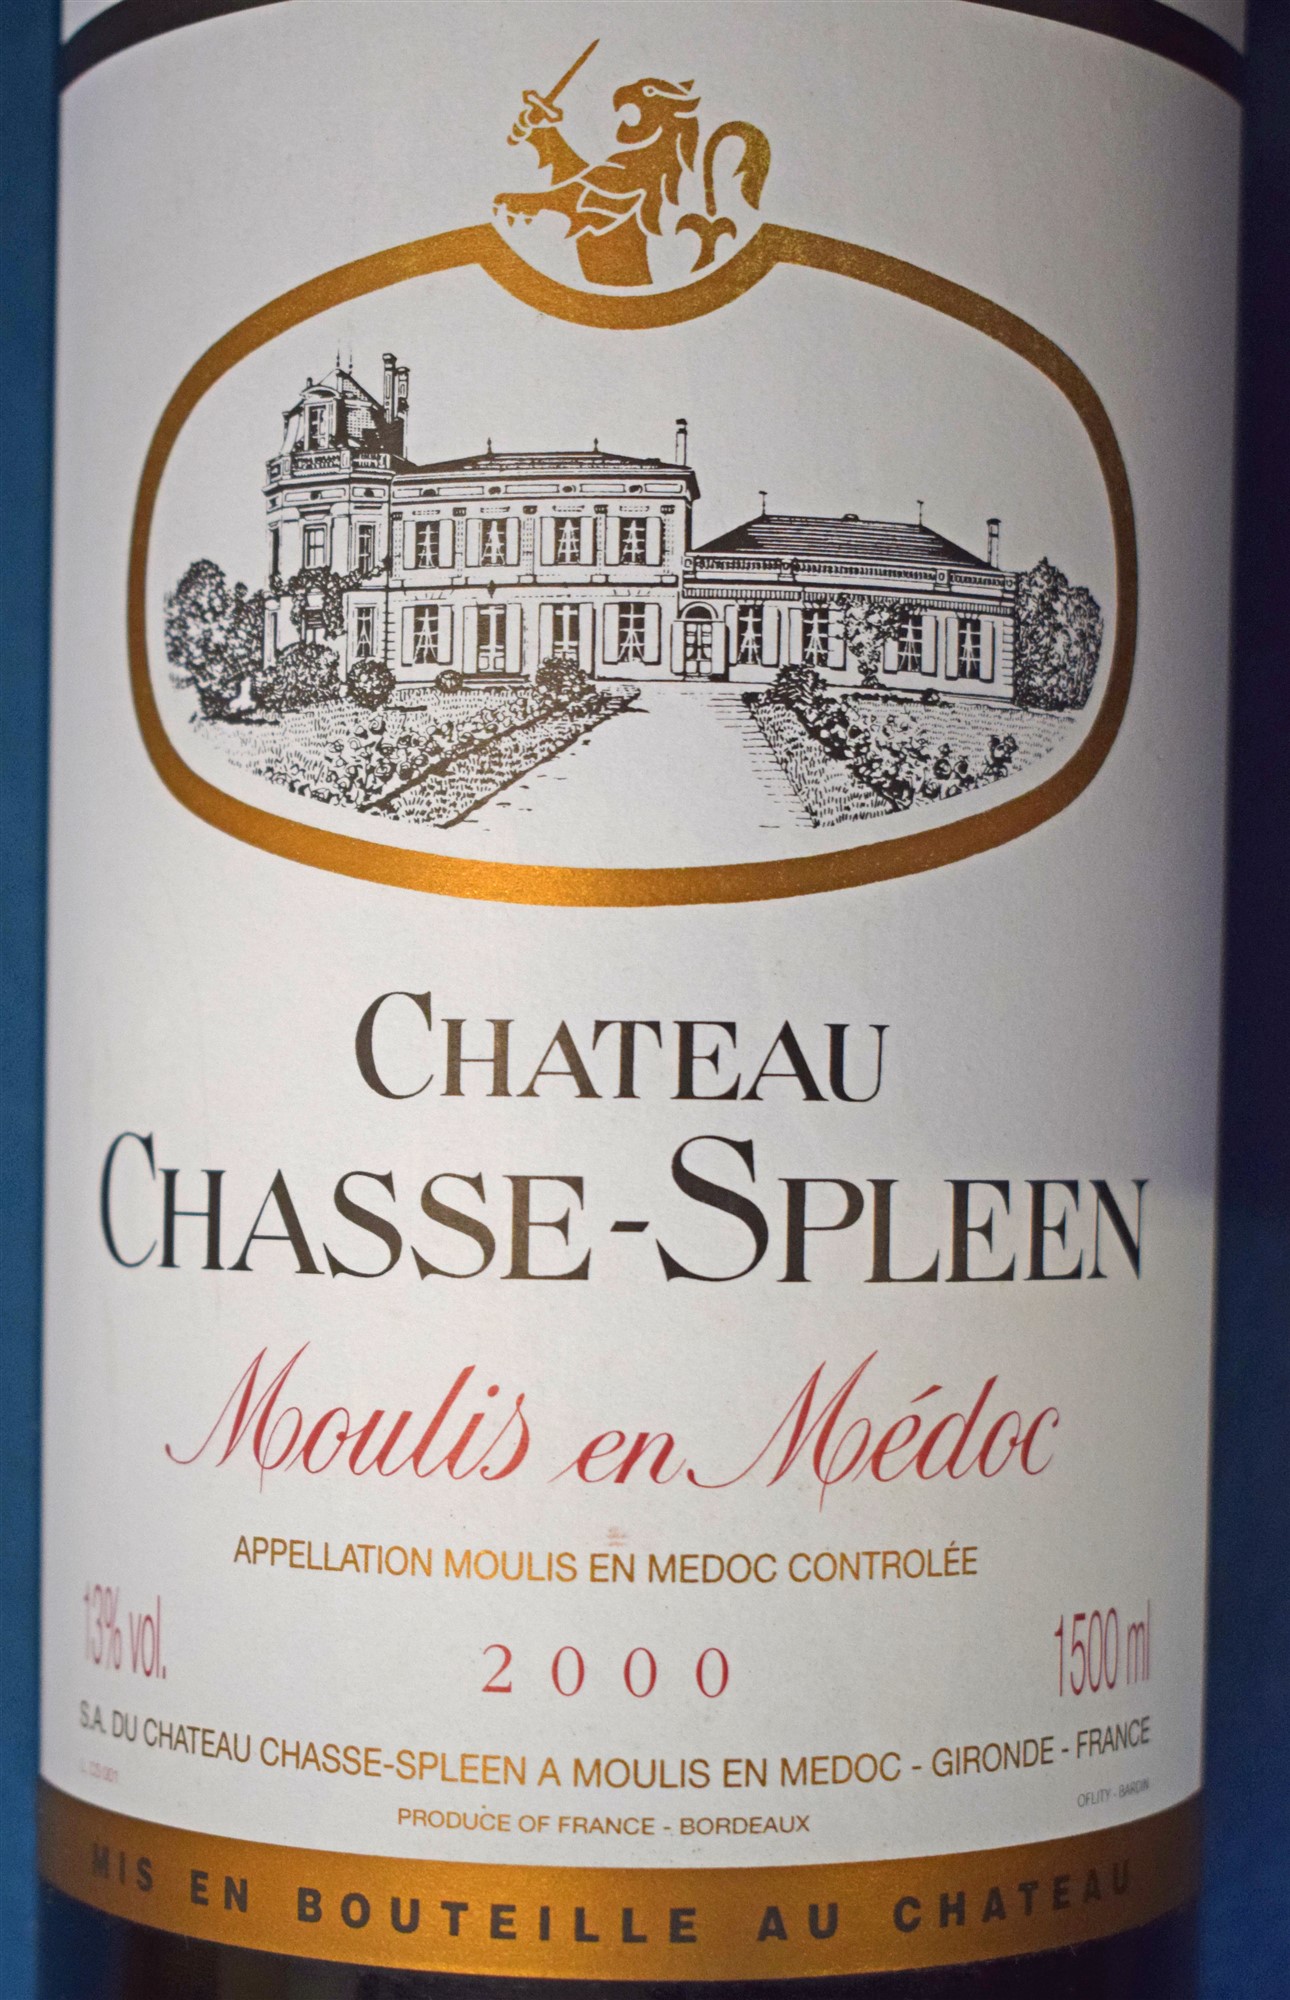 Chateau Chasse-Spleen, Moulis en Medoc, 2000, 3 magnums. To bid on this timed auction please visit